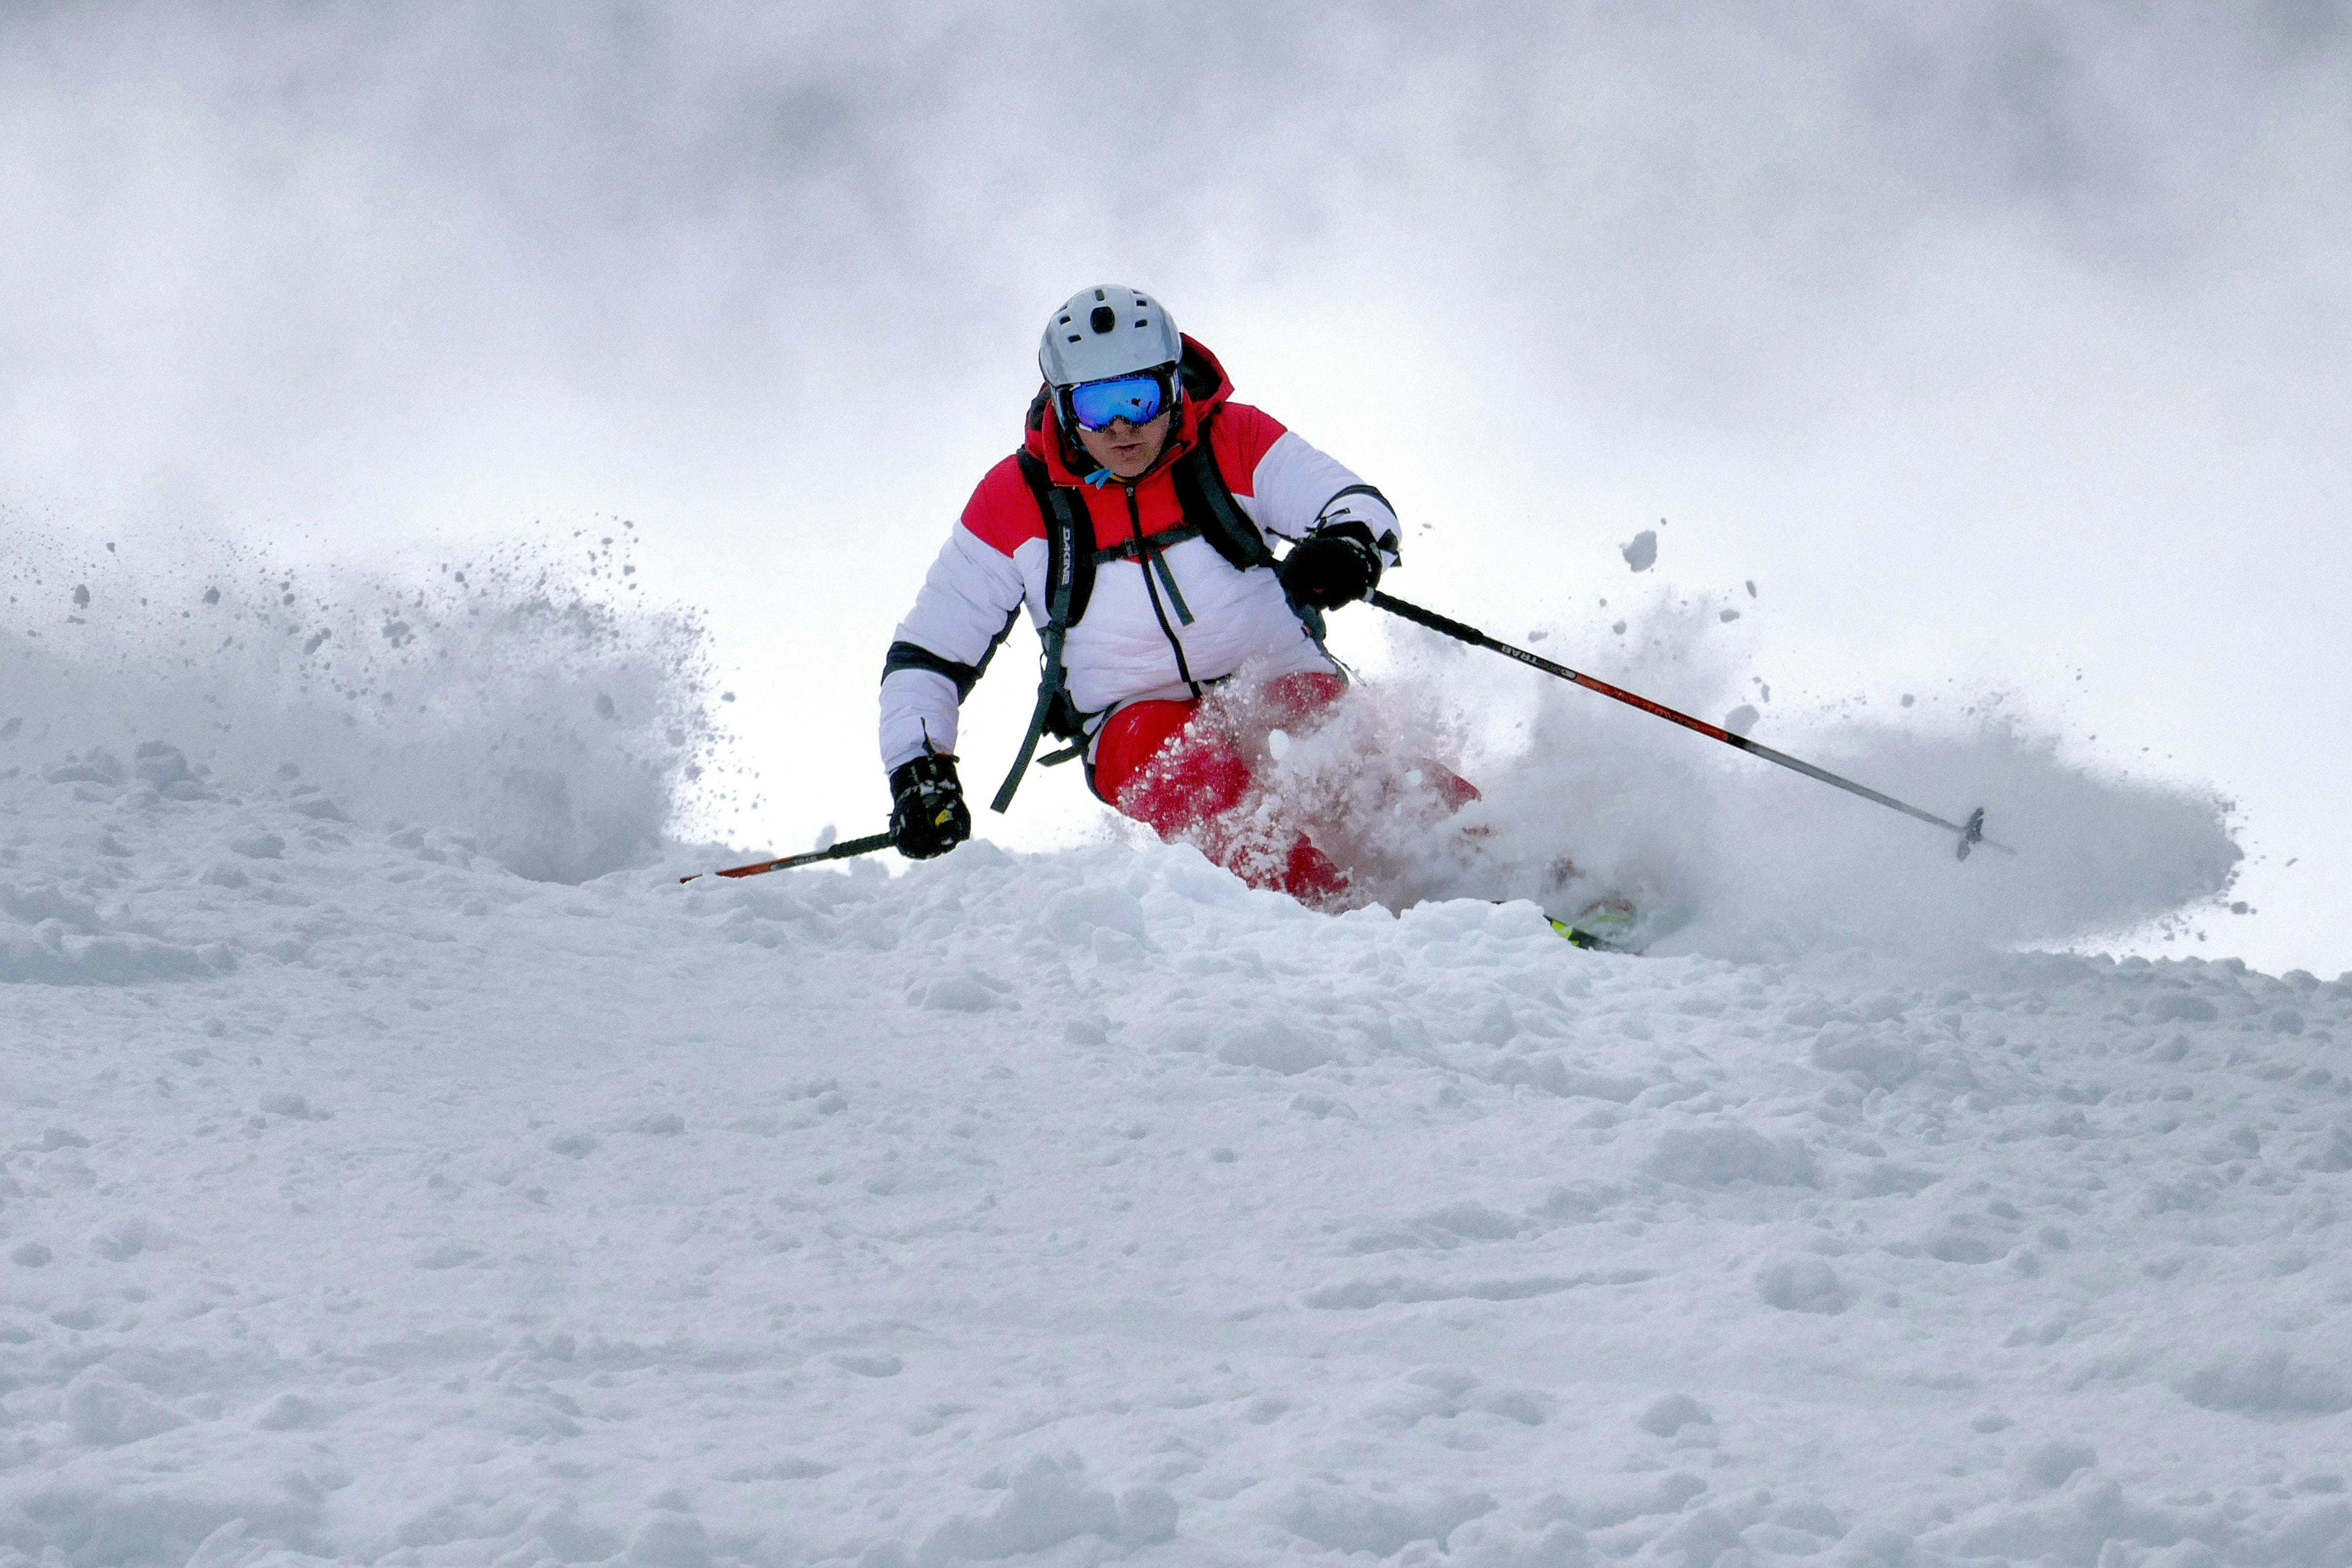 A skier heading quickly down a bumpy slope, kicking up a cloud of snow in the process.